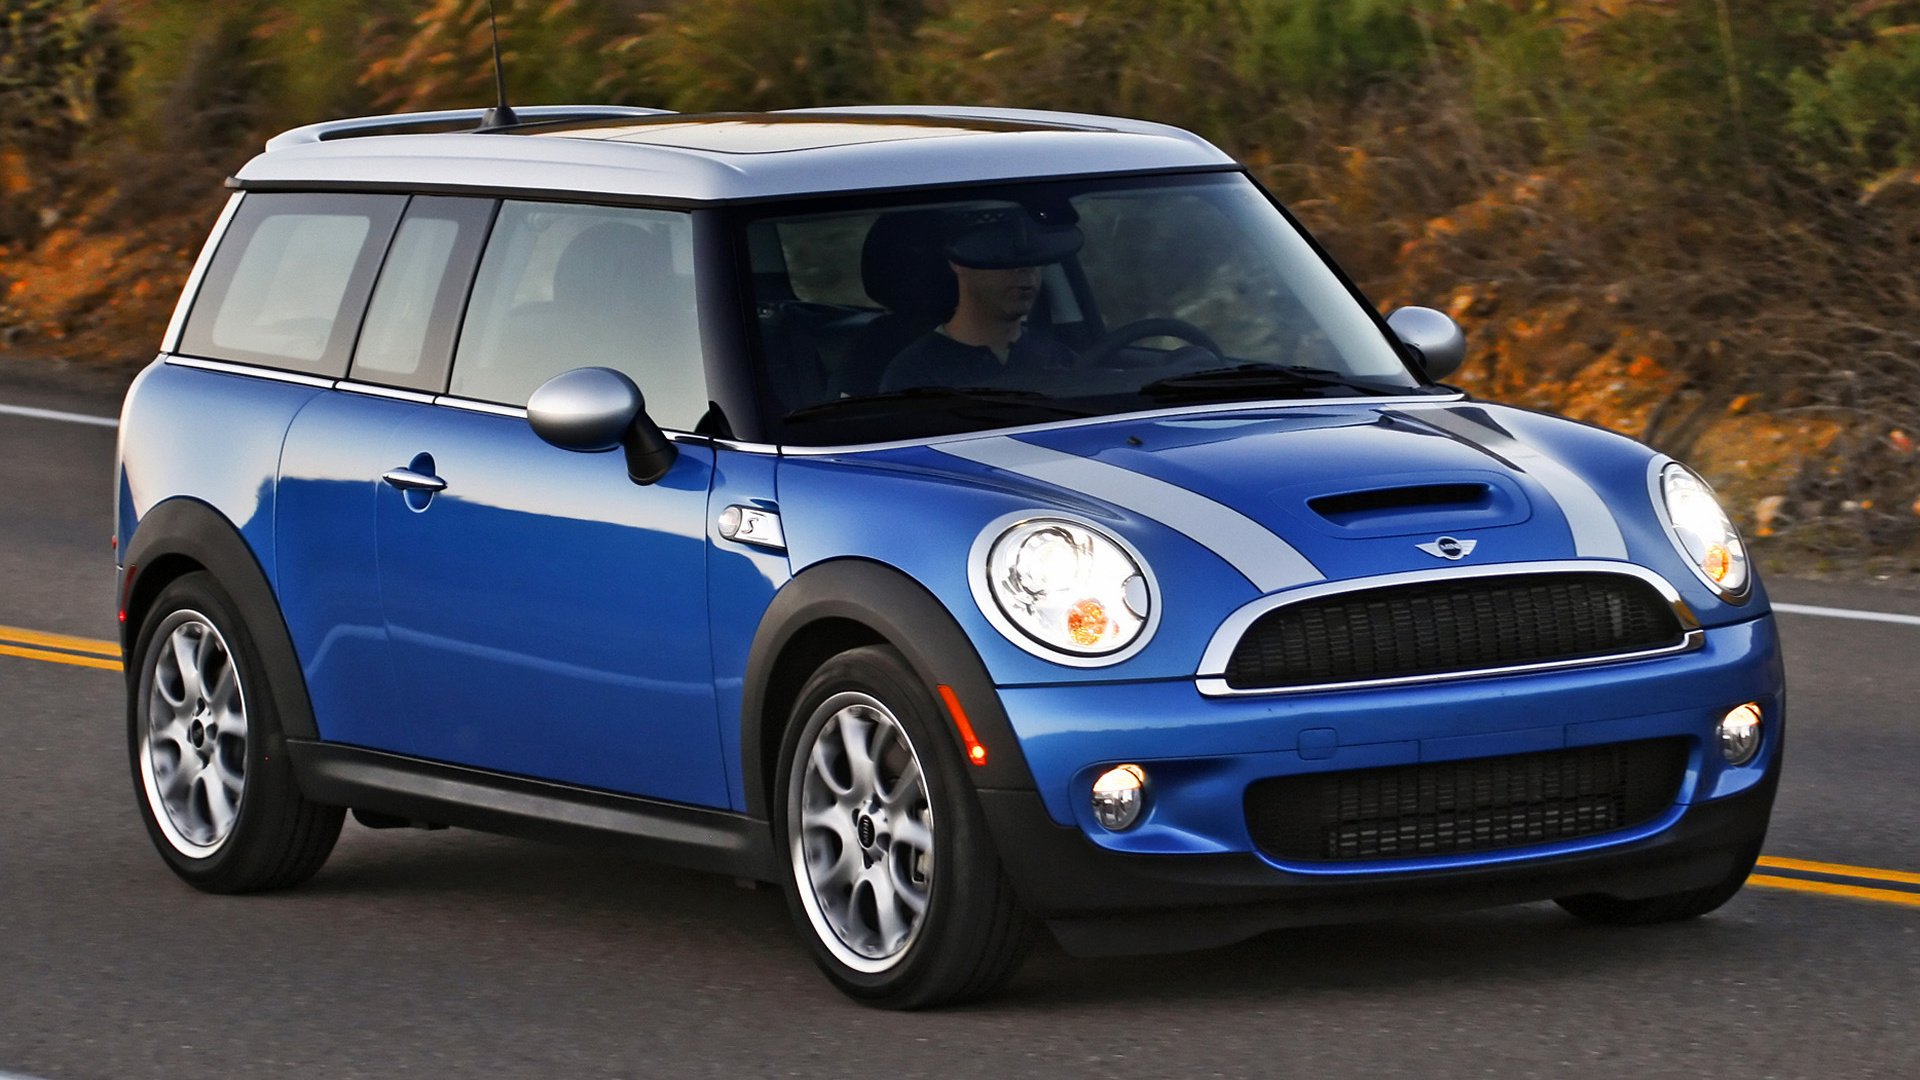 2007 Mini Cooper S Clubman (US) - Wallpapers and HD Images | Car Pixel